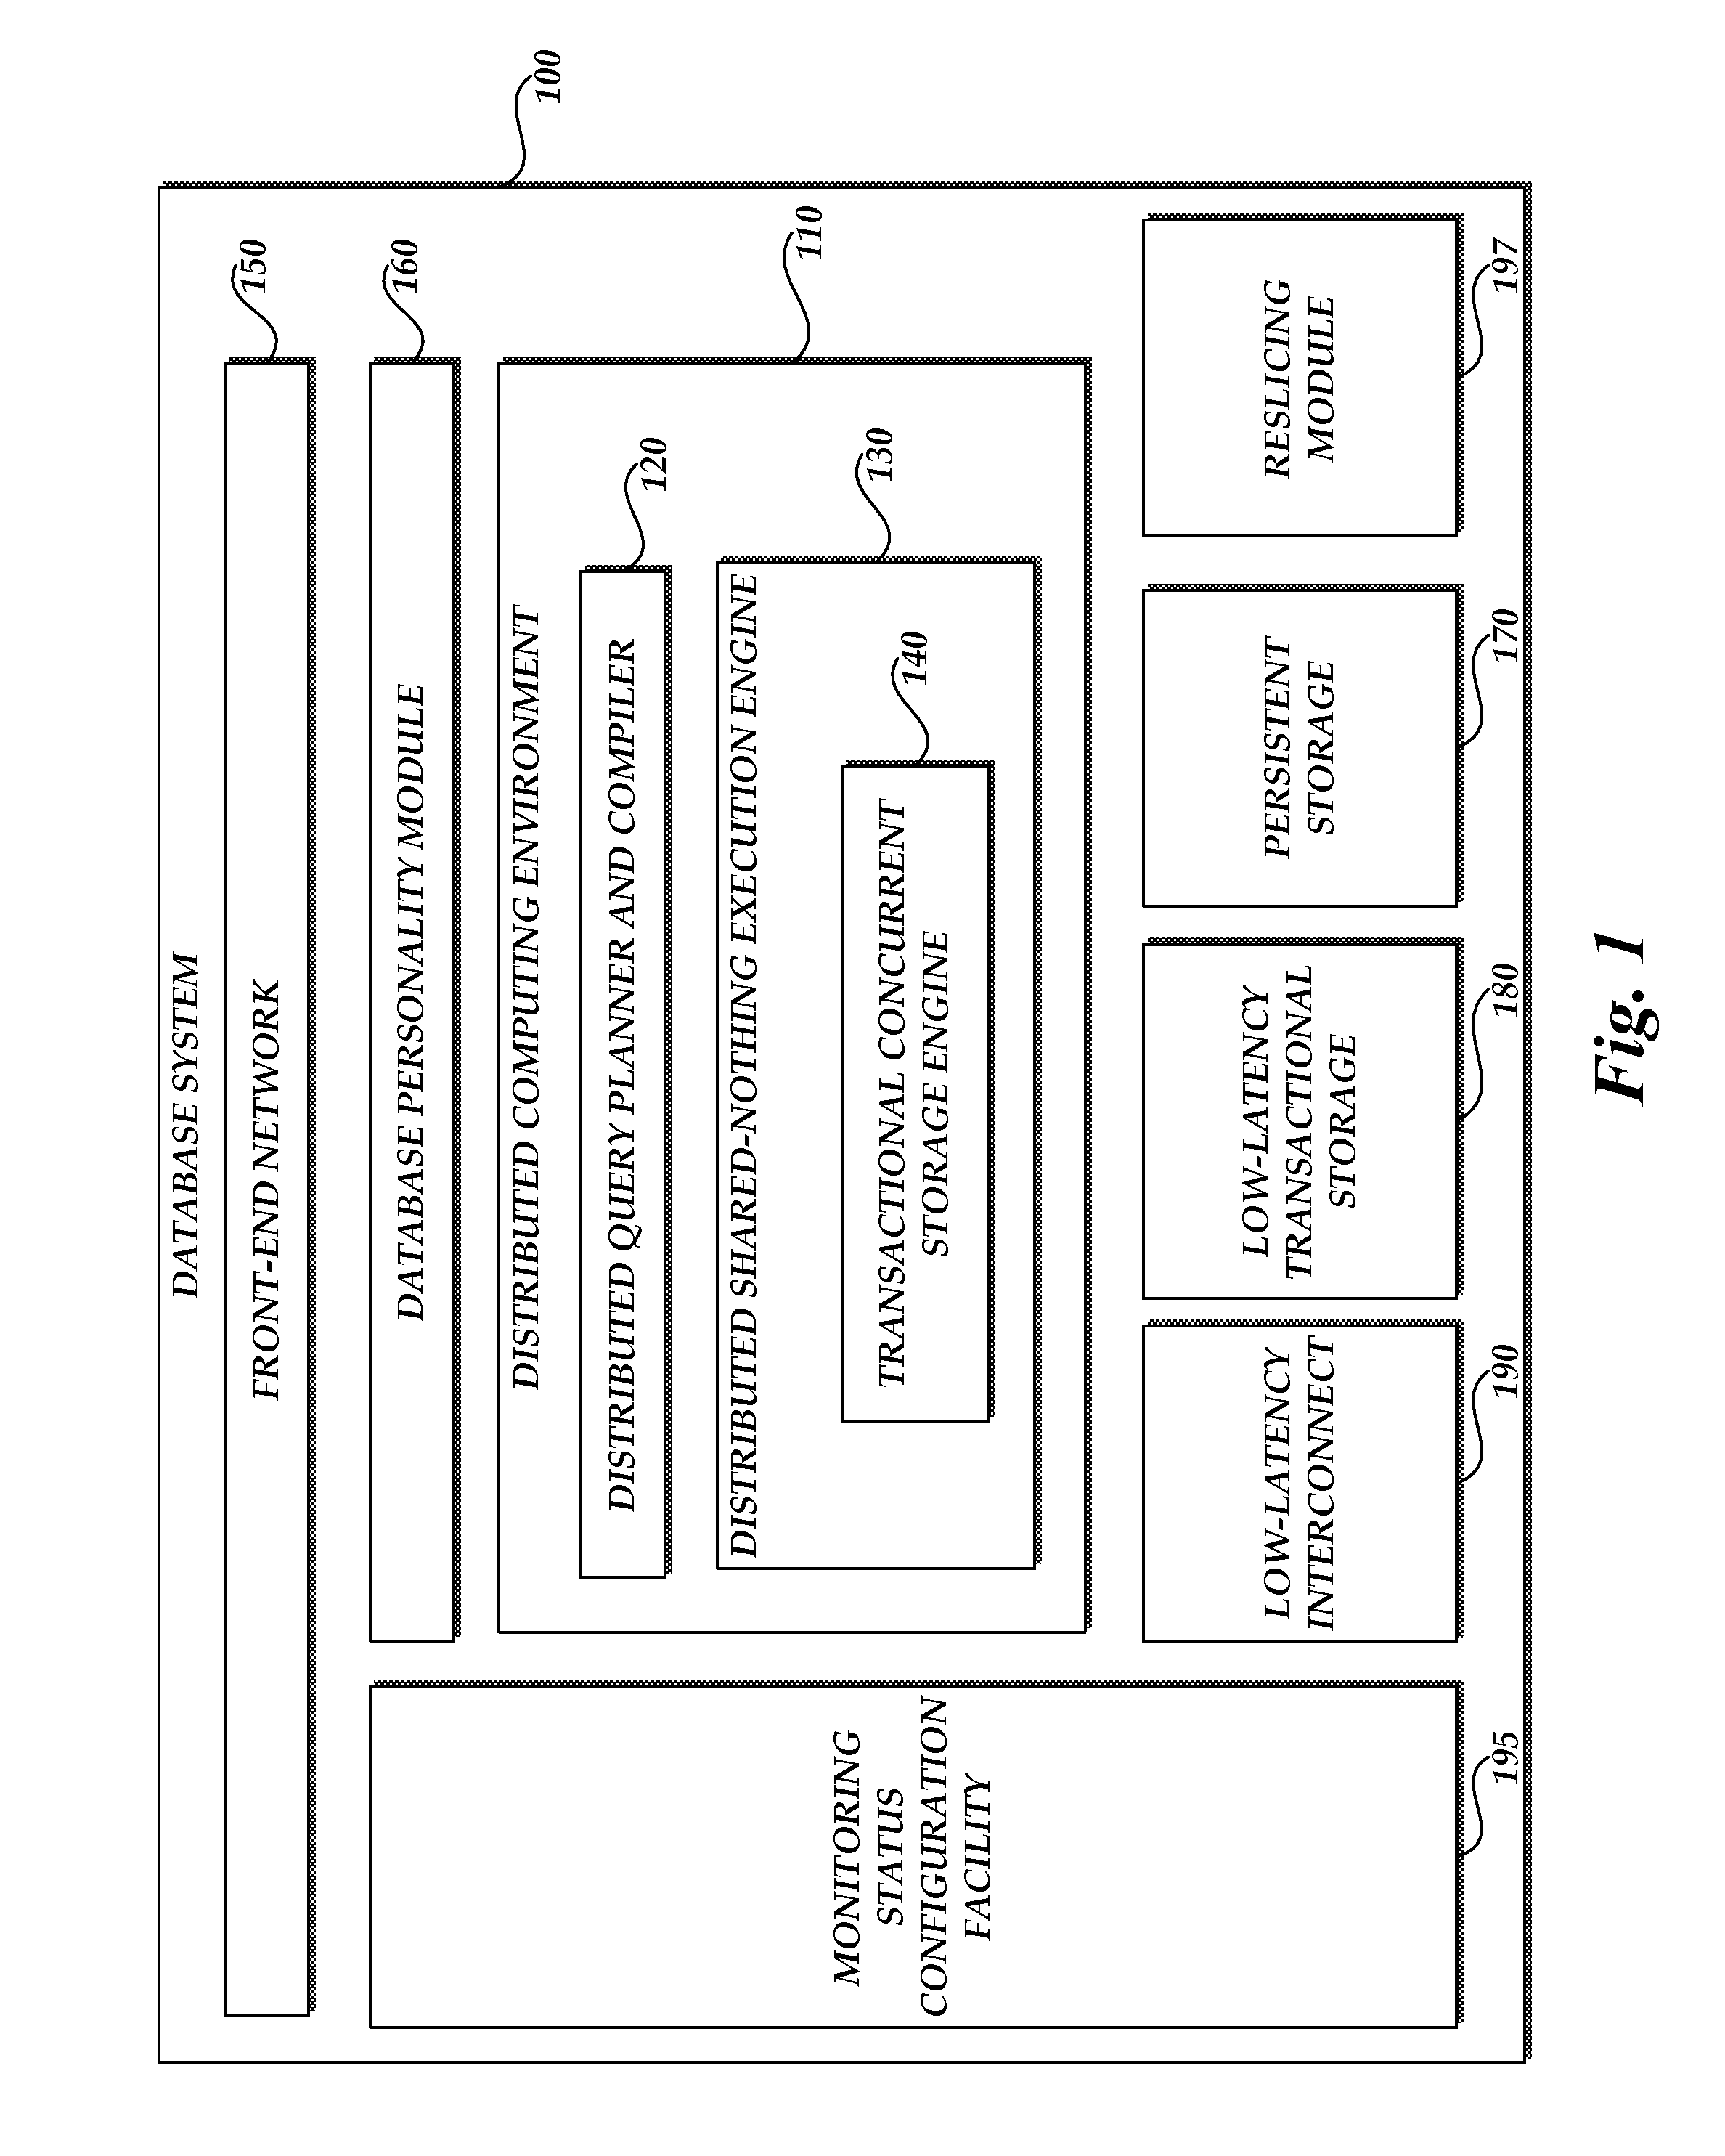 Systems and methods for reslicing data in a relational database